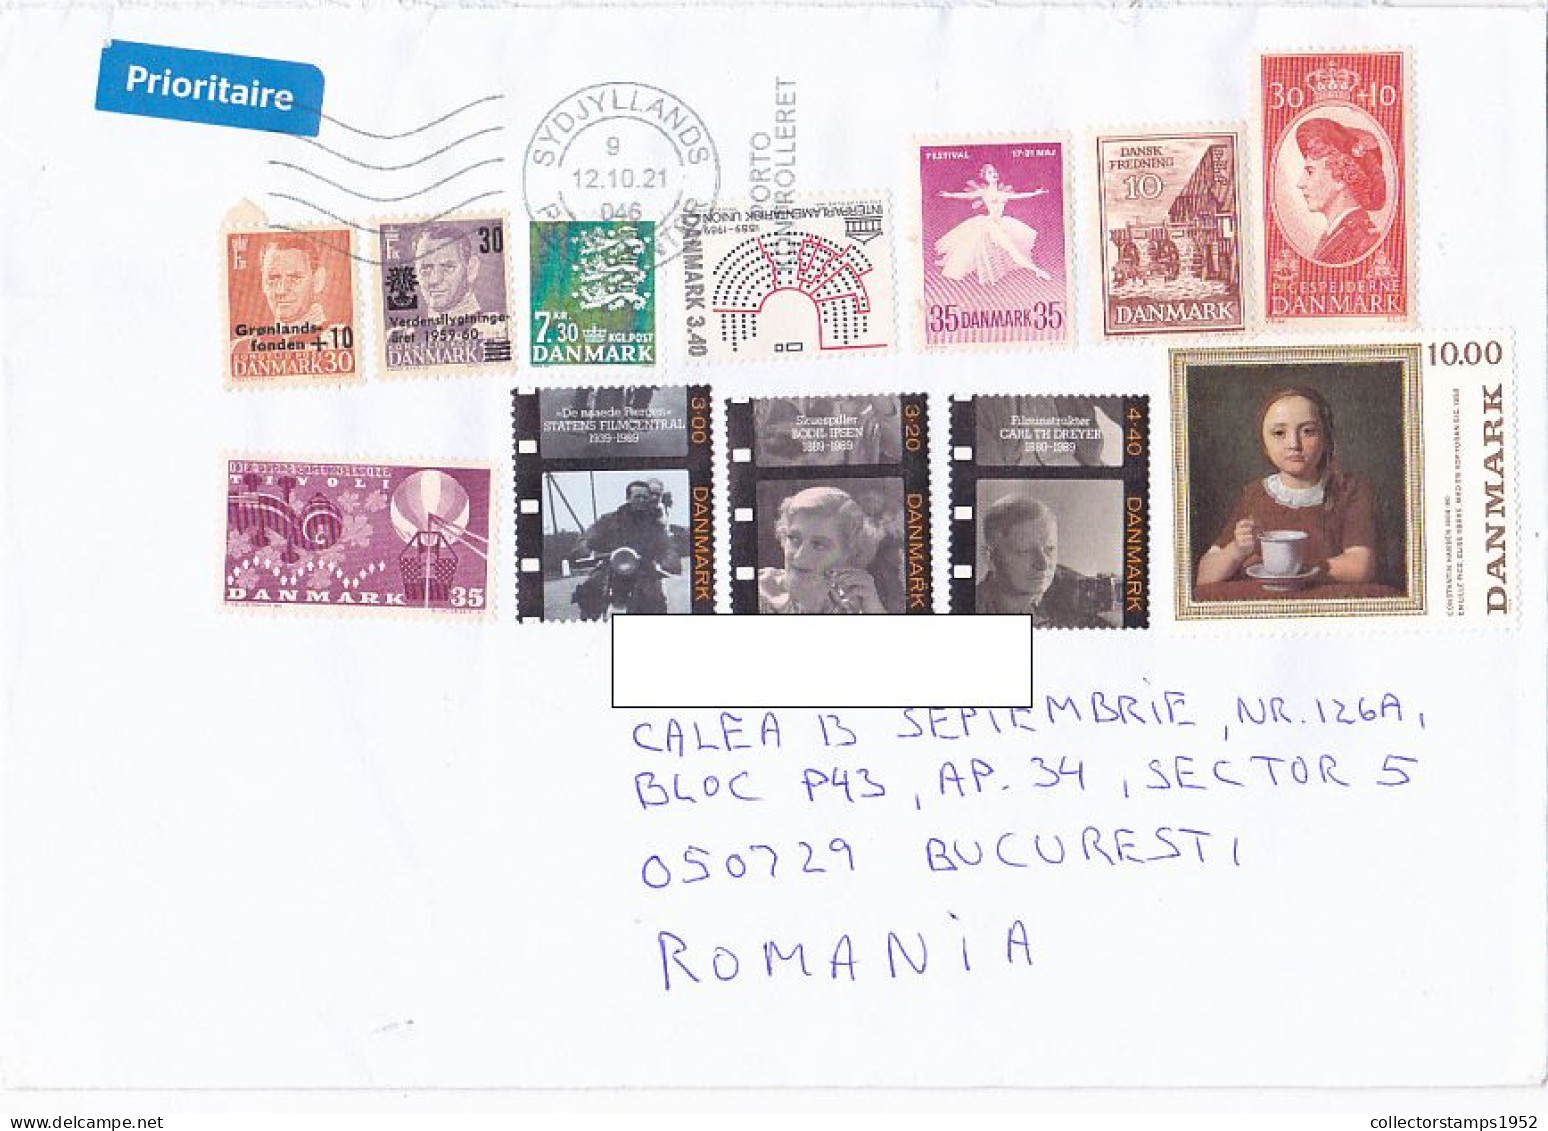 KING FREDERICK IX, ACTORS, PERSONALITIES, PAINTING, PARLIAMENT, FINE STAMPS ON COVER, 2021, DENMARK - Storia Postale